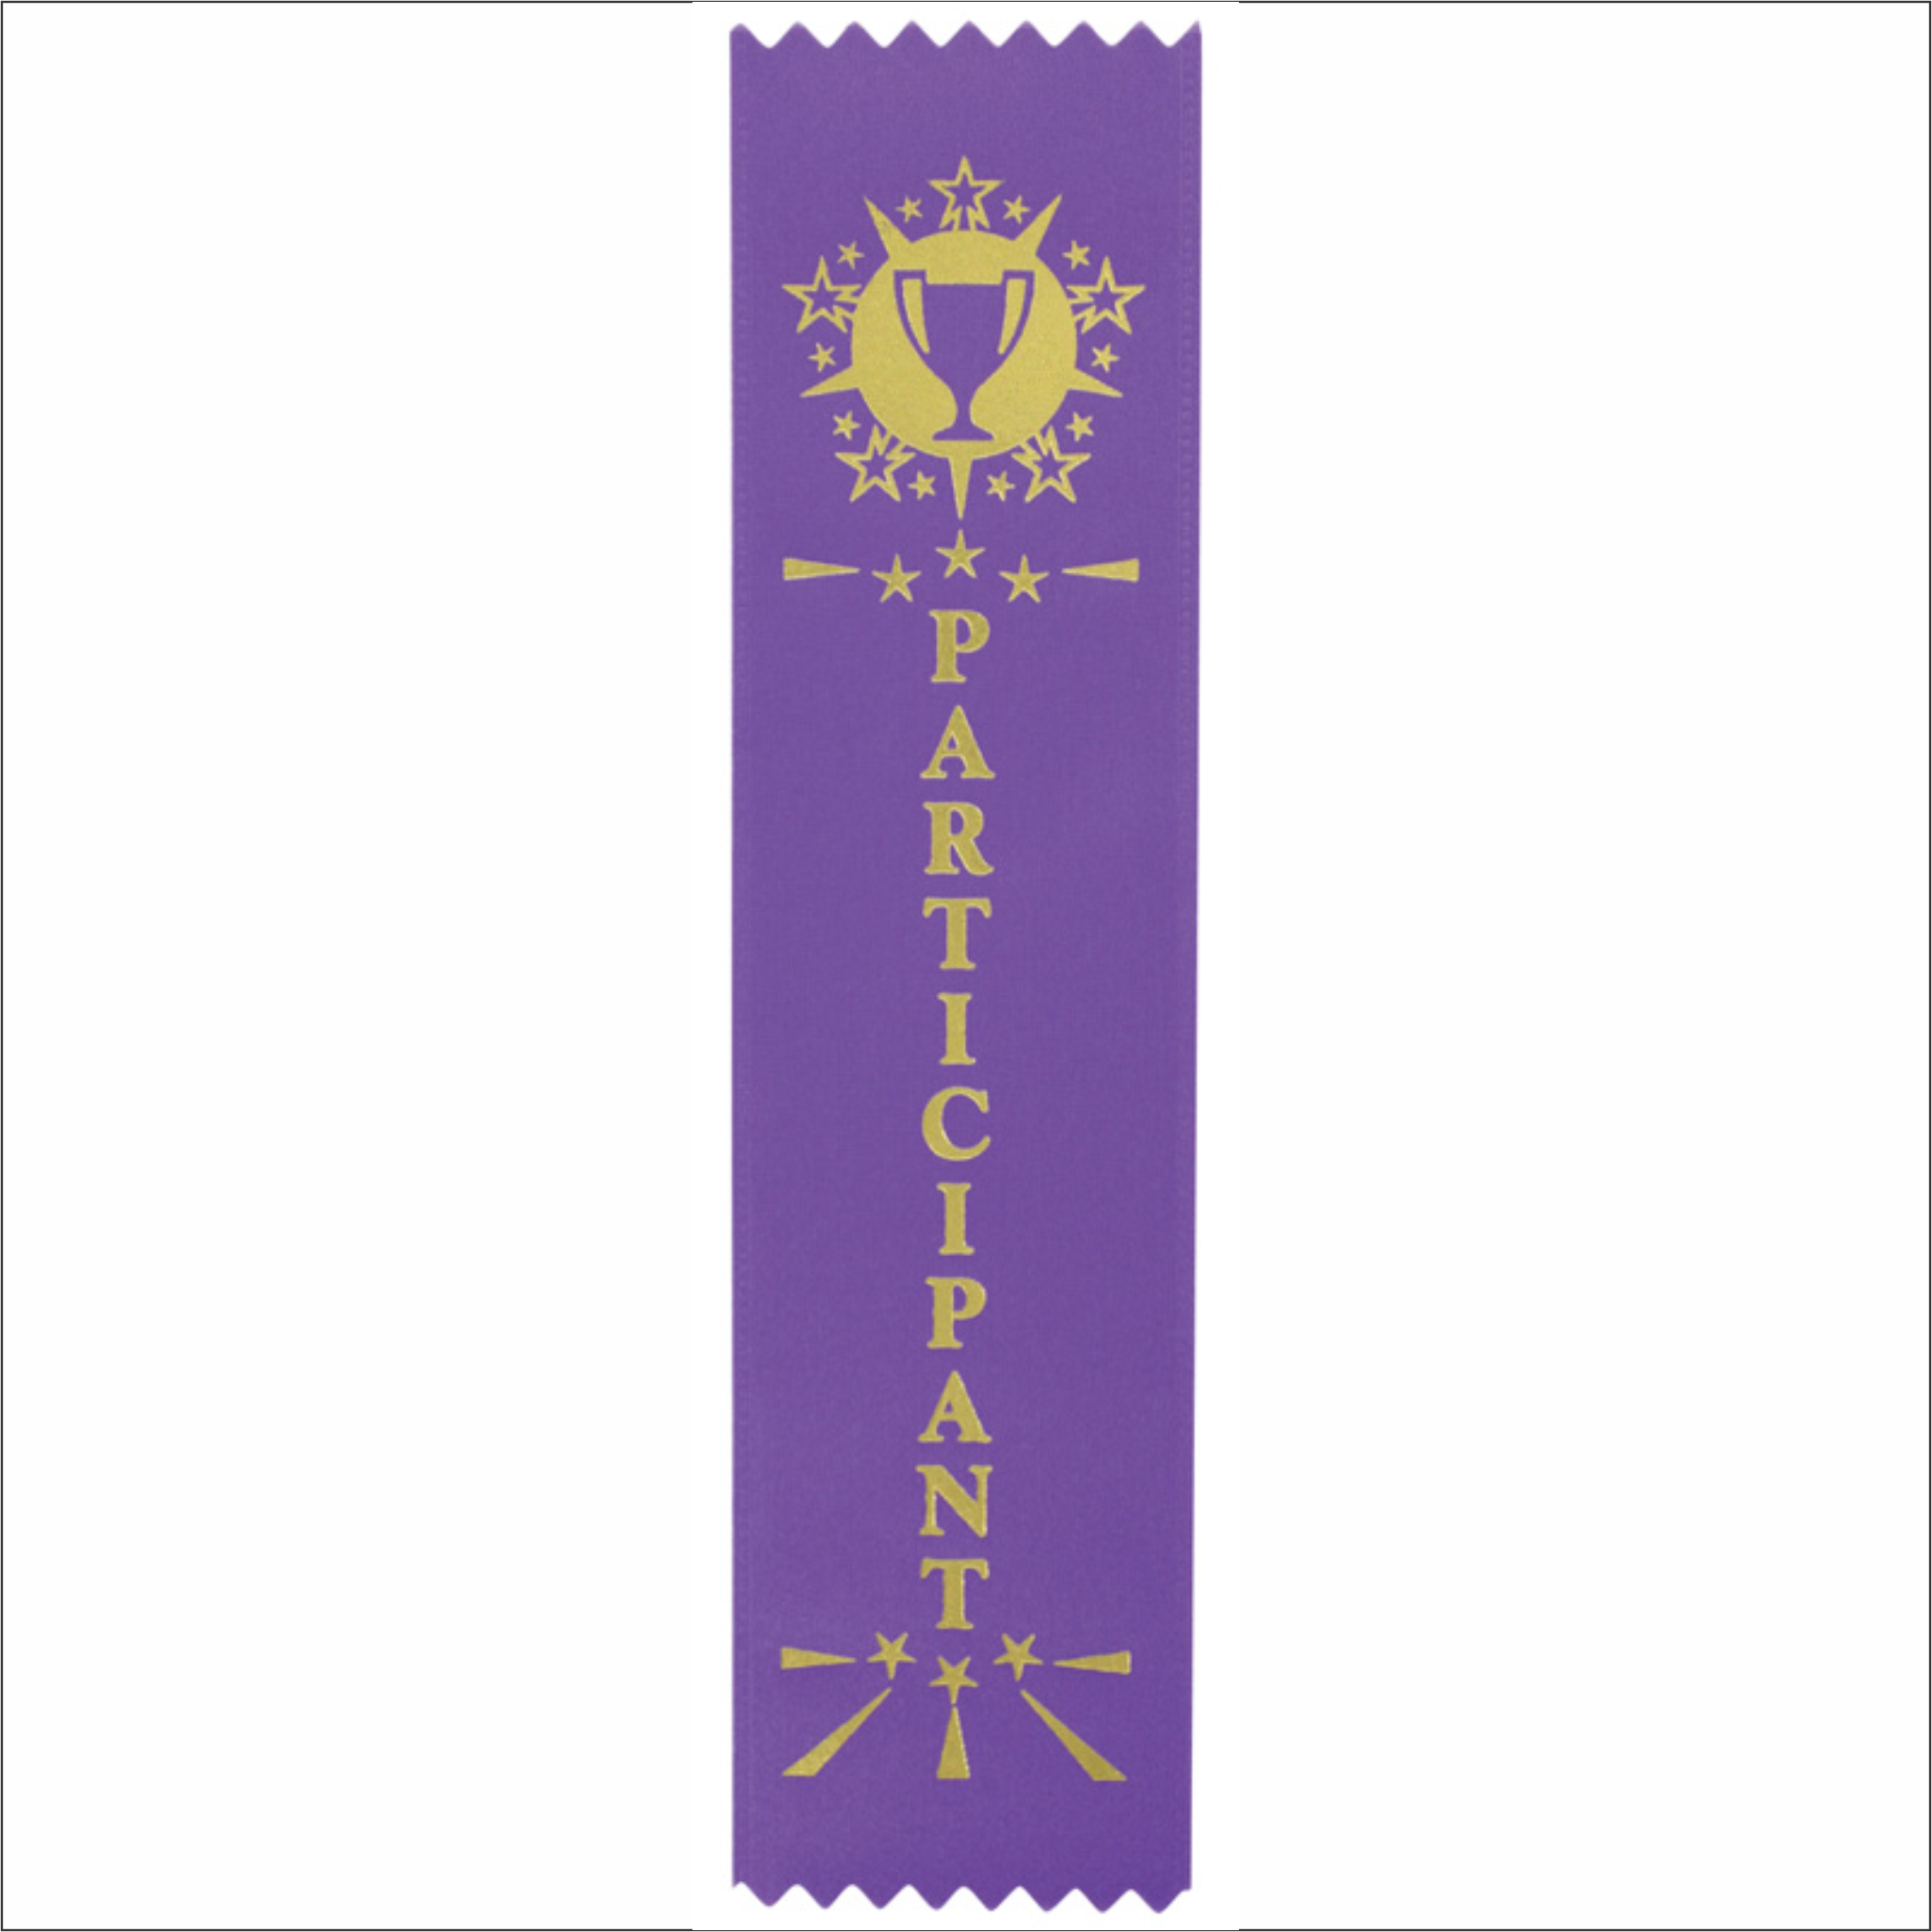 Participation Ribbons - Pack of 25 - SR-200 series